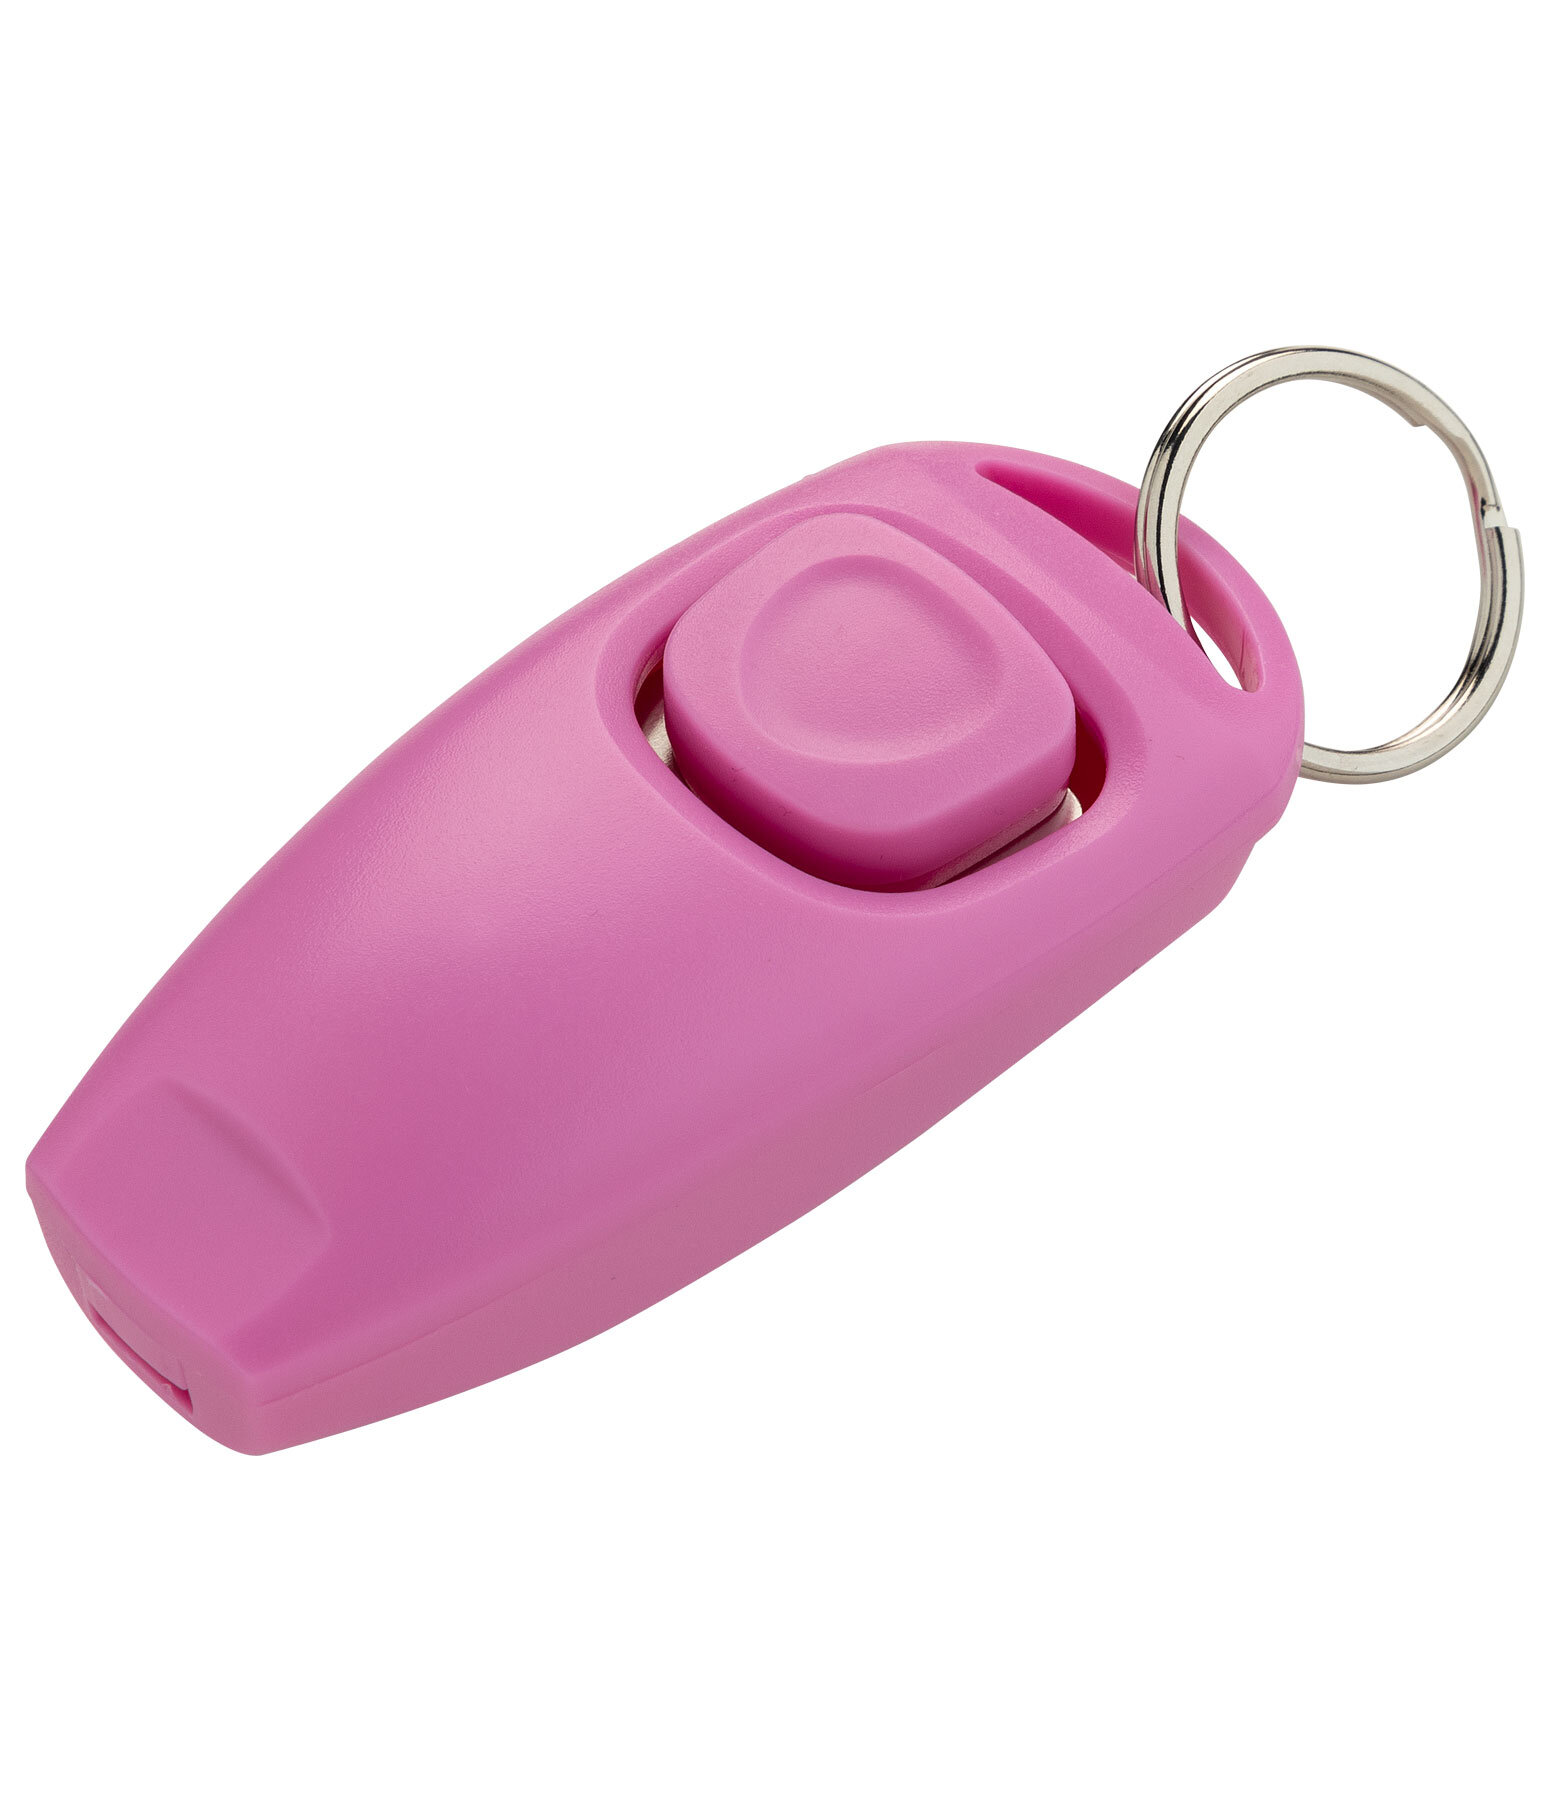 Combined Dog Whistle with Clicker